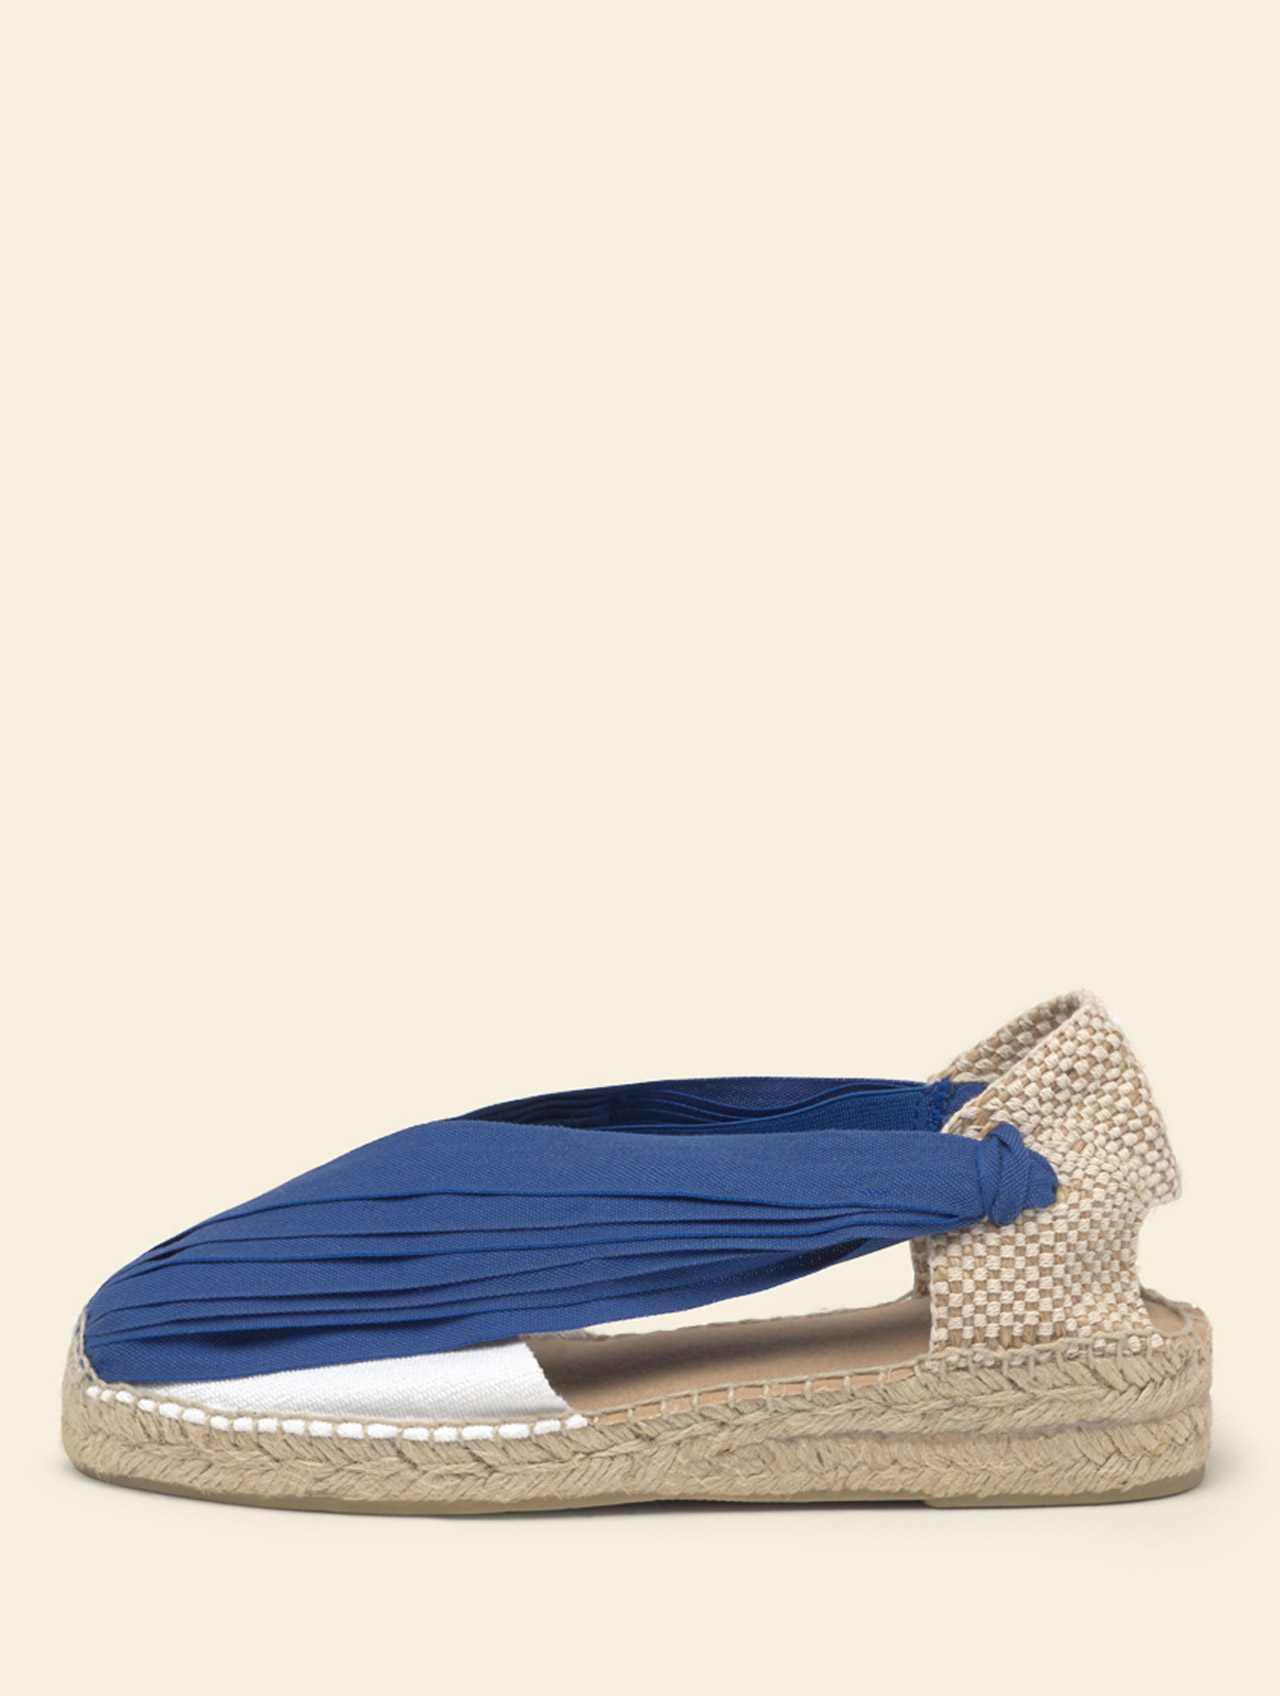 Blue Traditional espadrille Valls with elastics in the sides, 3.5 cm wedge approximately. Handmade espadrille by La Manual Alpargatera, Barcelona.